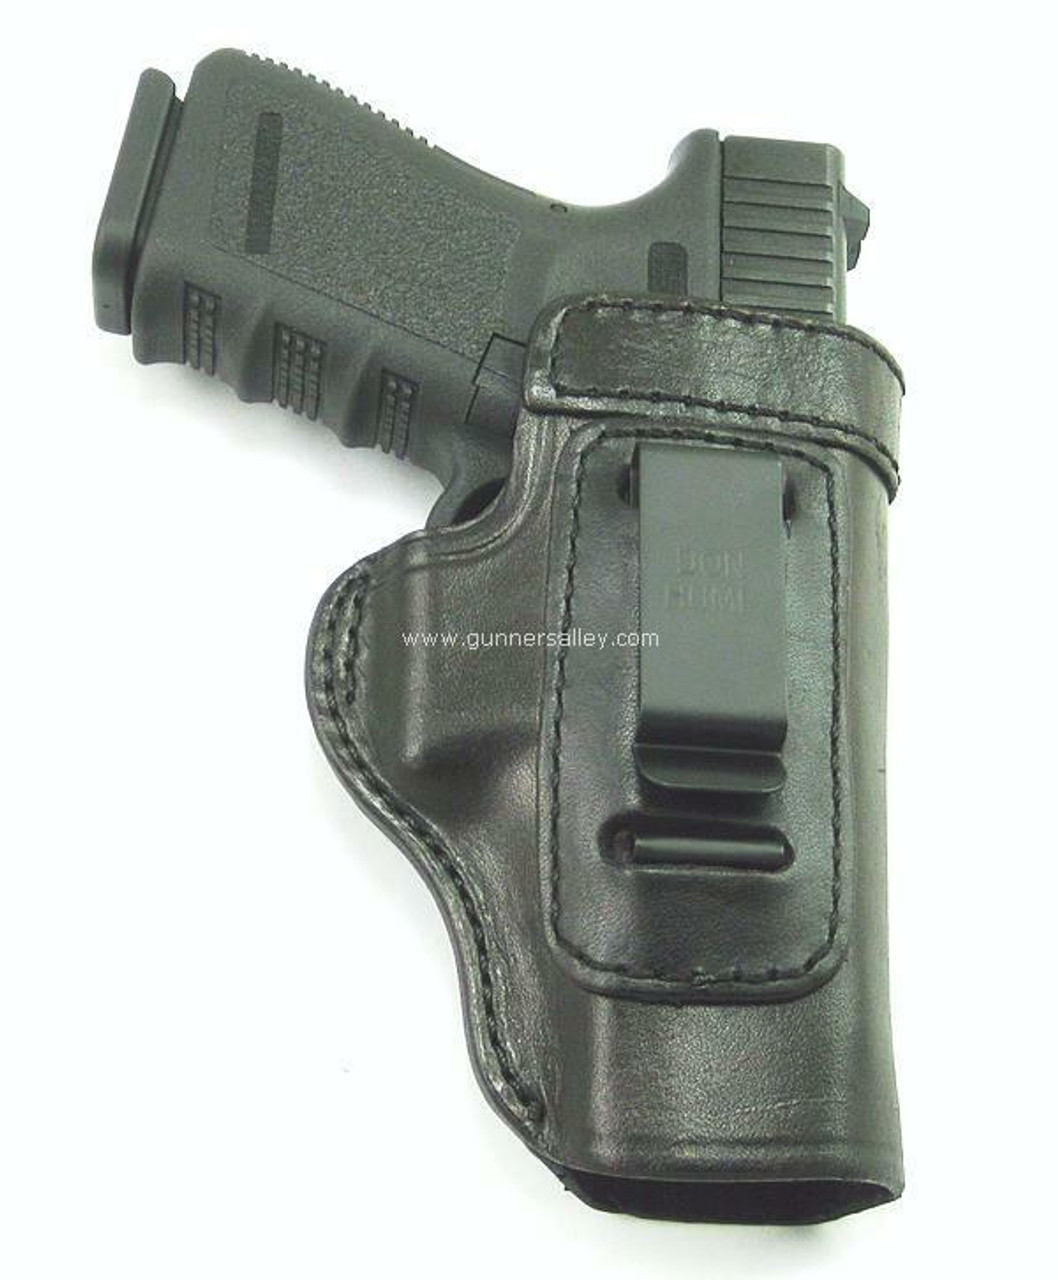 Black - Front View - Shown with a Glock 19 for Demonstration Purposes